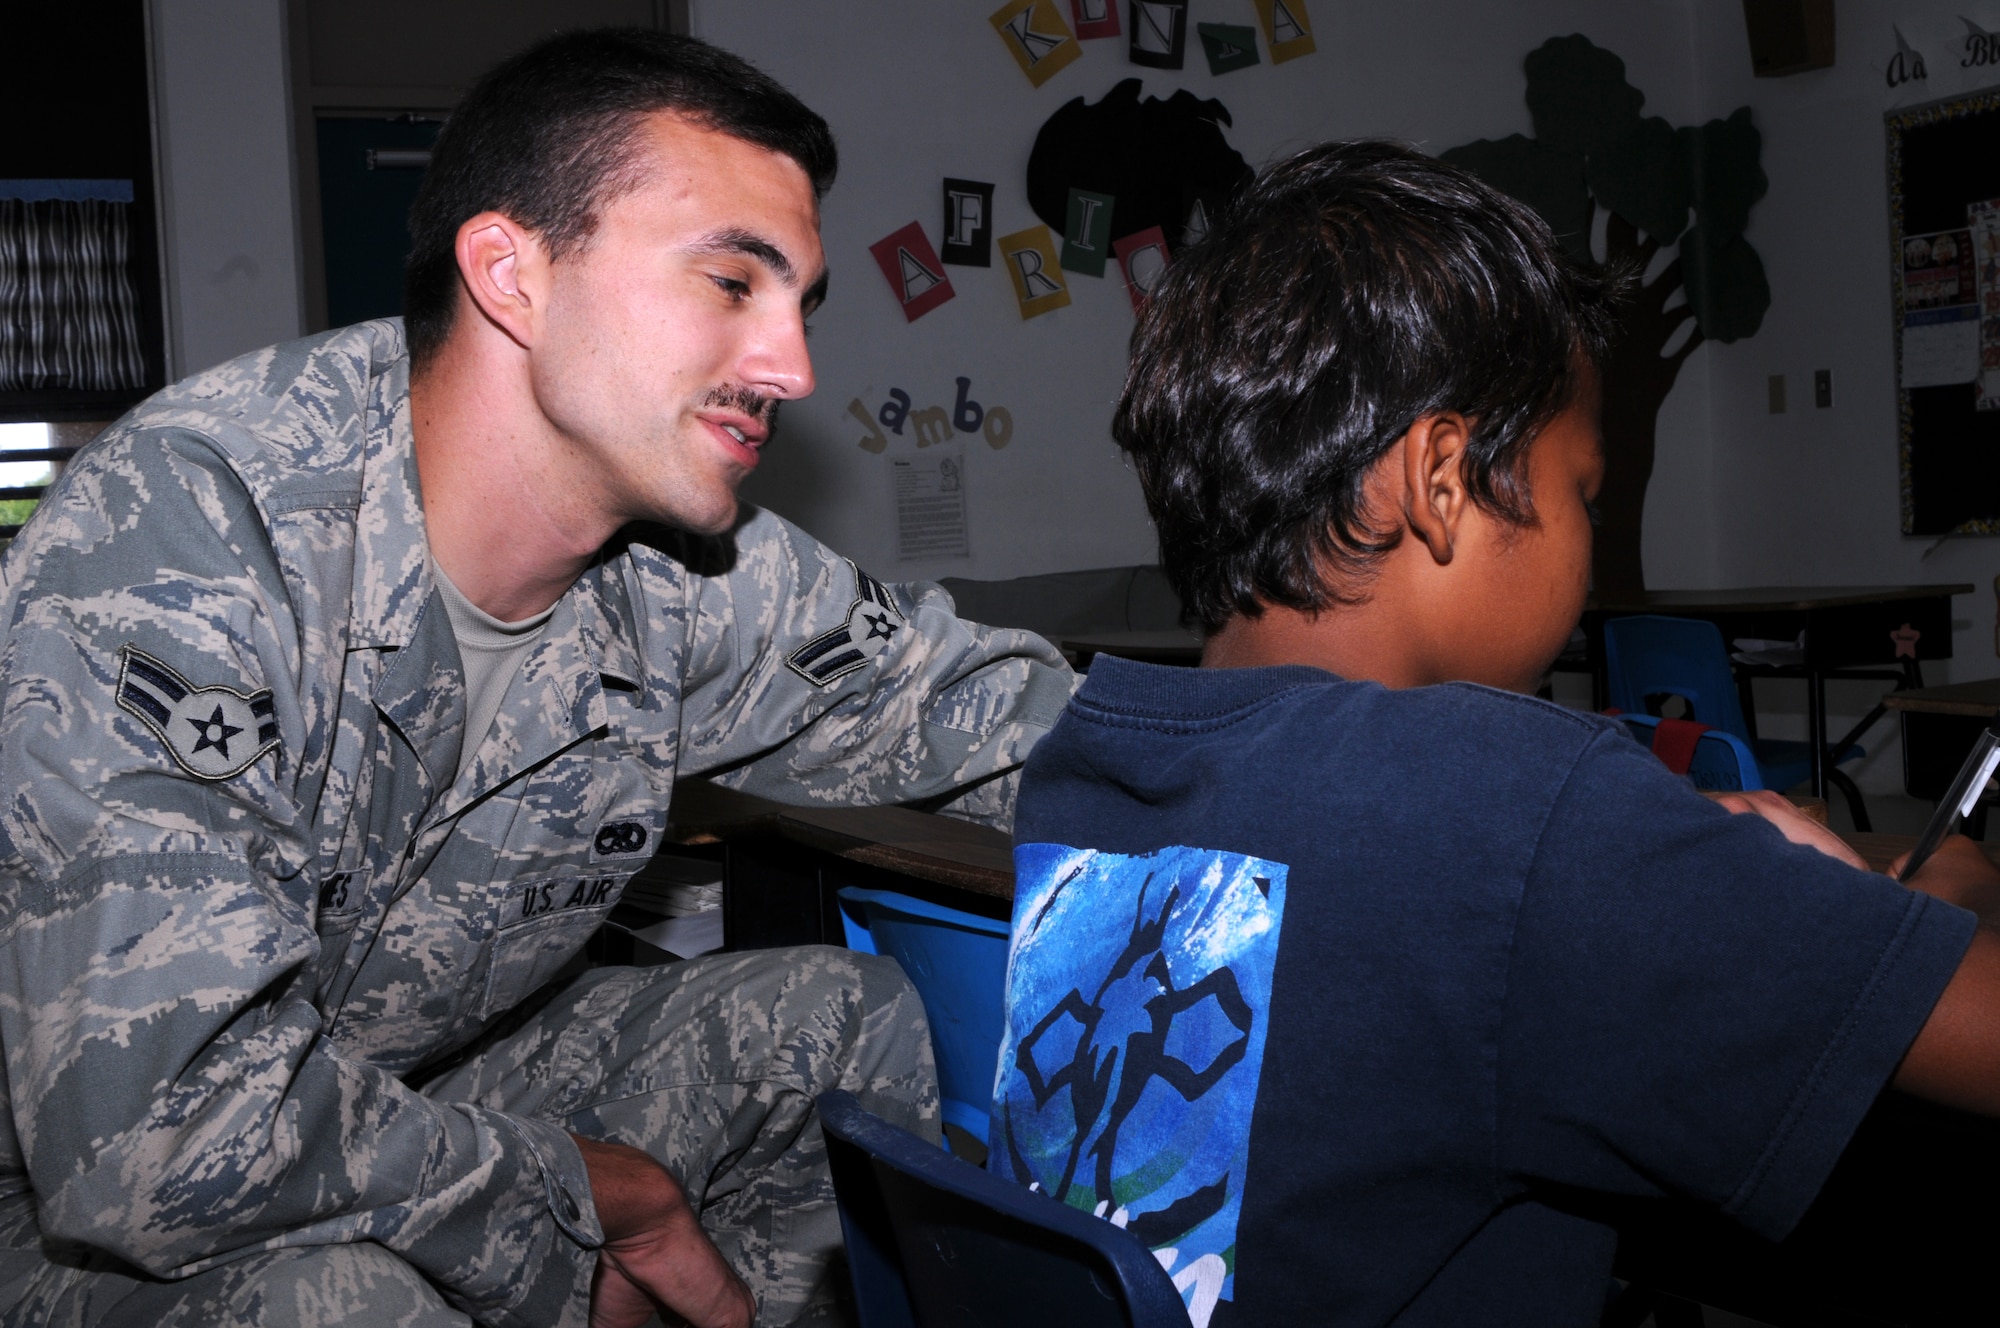 Airman 1st Class Erik Johannas,  36th Expeditionary Aircraft Maintenance Squadron weapon loader, helps a third grader at  Machananao Elementary School during a tutoring session March 19, 2009. Airmen from the 36th Expeditionary Aircraft Maintenance Unit, deployed here from Elmendorf Air Force Base, Alaska, have been spending their time bettering the local community of Guam through various volunteer efforts.
(U.S. Air Force photo by Senior Airman Ryan Whitney)